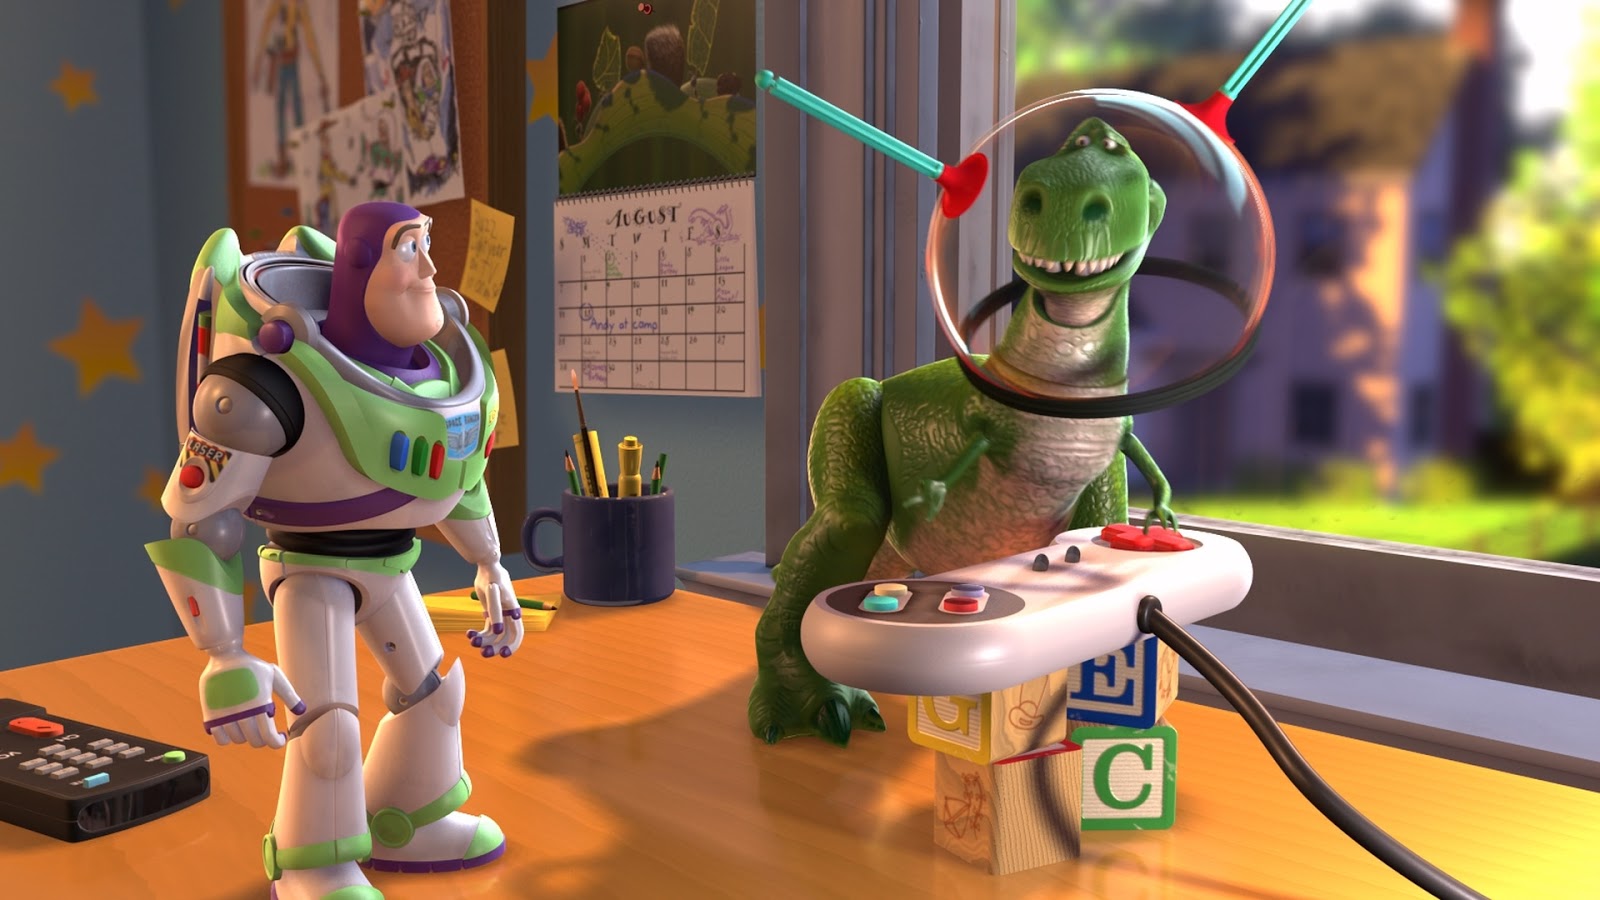 Buzz Lightyear and an alien in Toy Story 2 Toy Story 2 animatedfilmreviews.filminspector.com